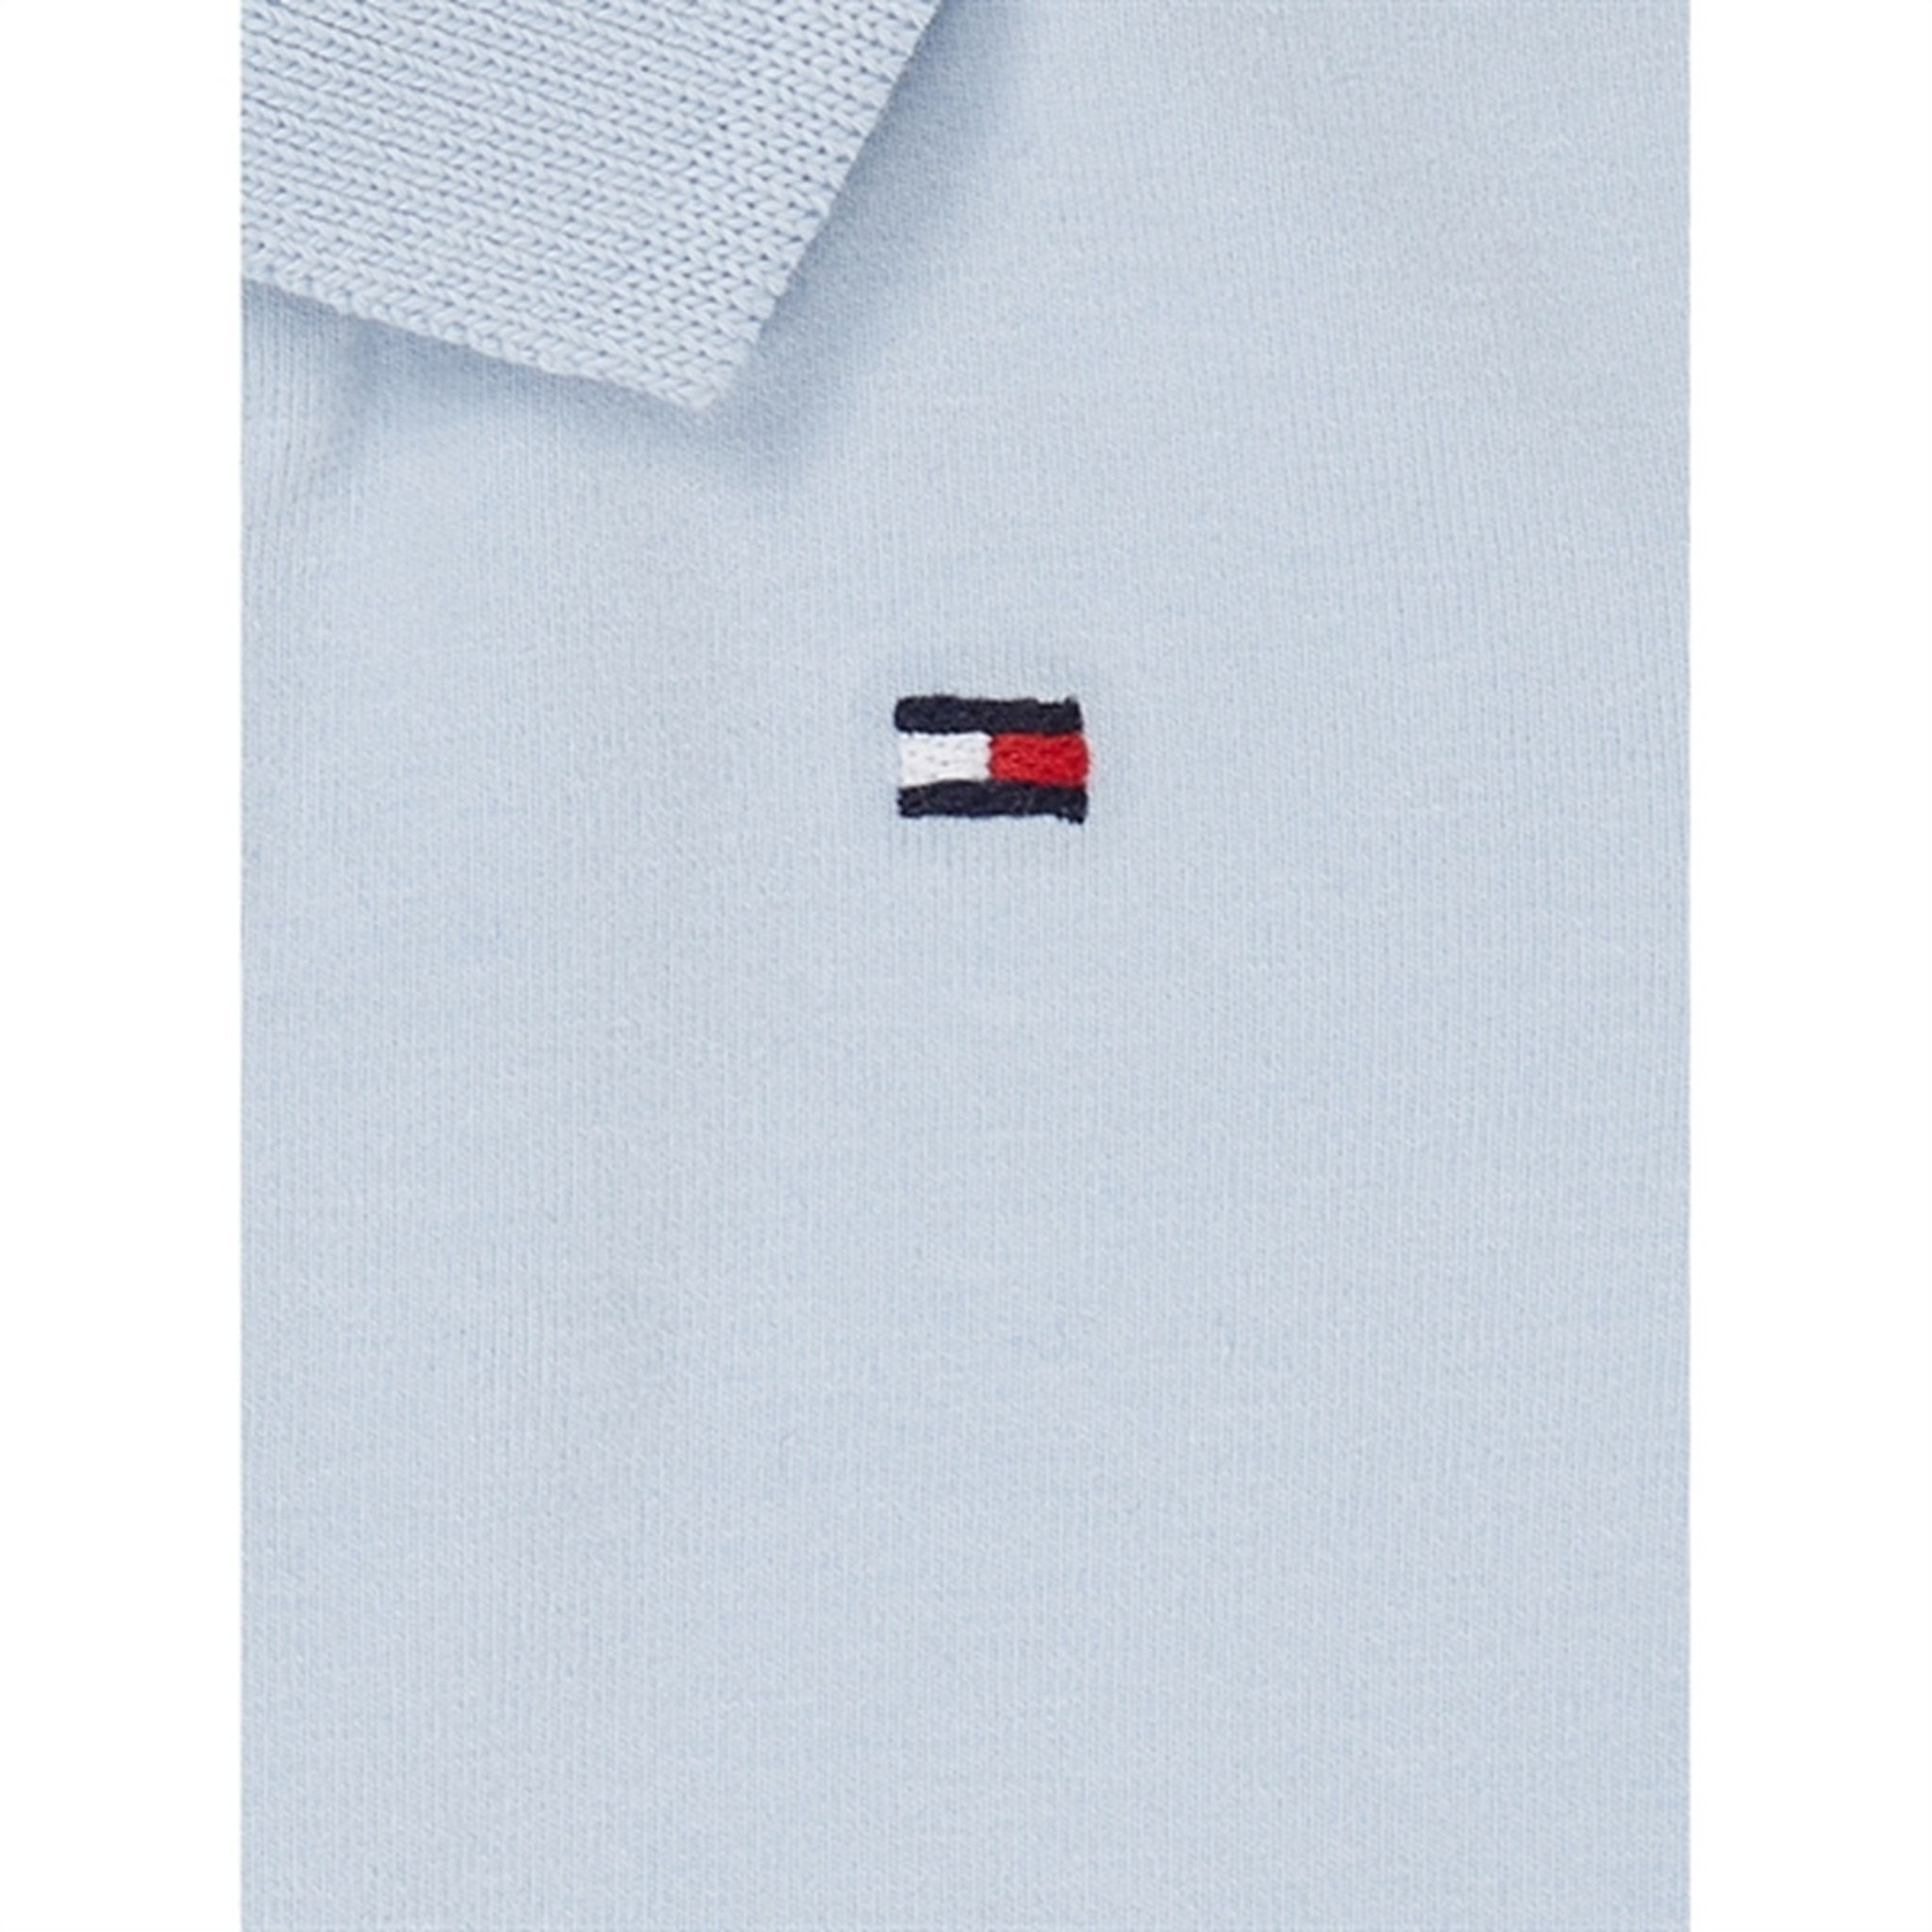 Tommy Hilfiger Baby Flag Polo T-Shirt Breezy Blue 2